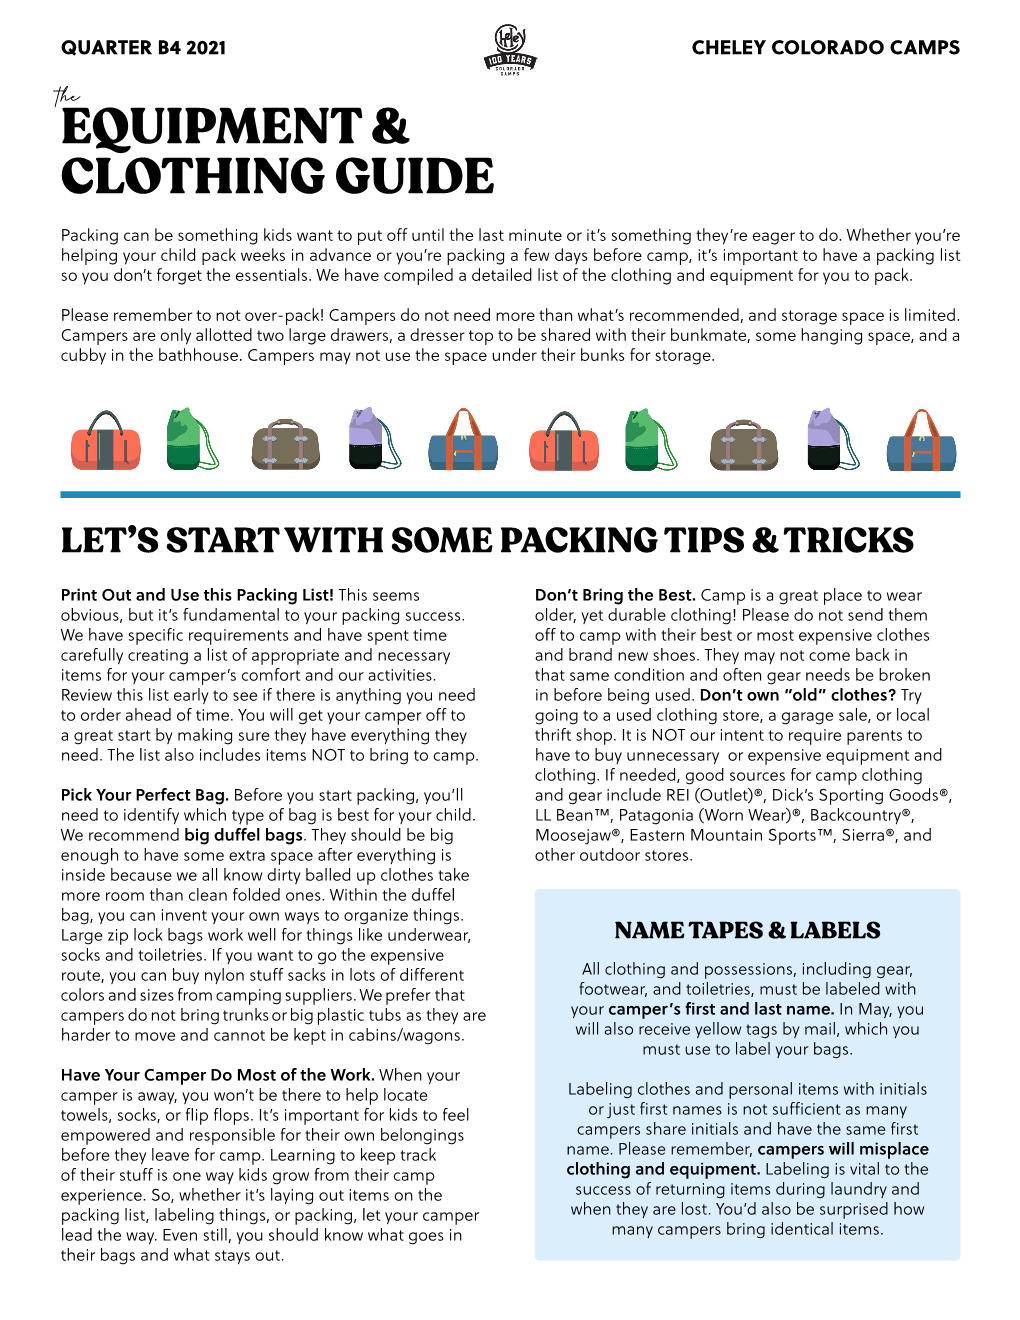 Equipment & Clothing Guide